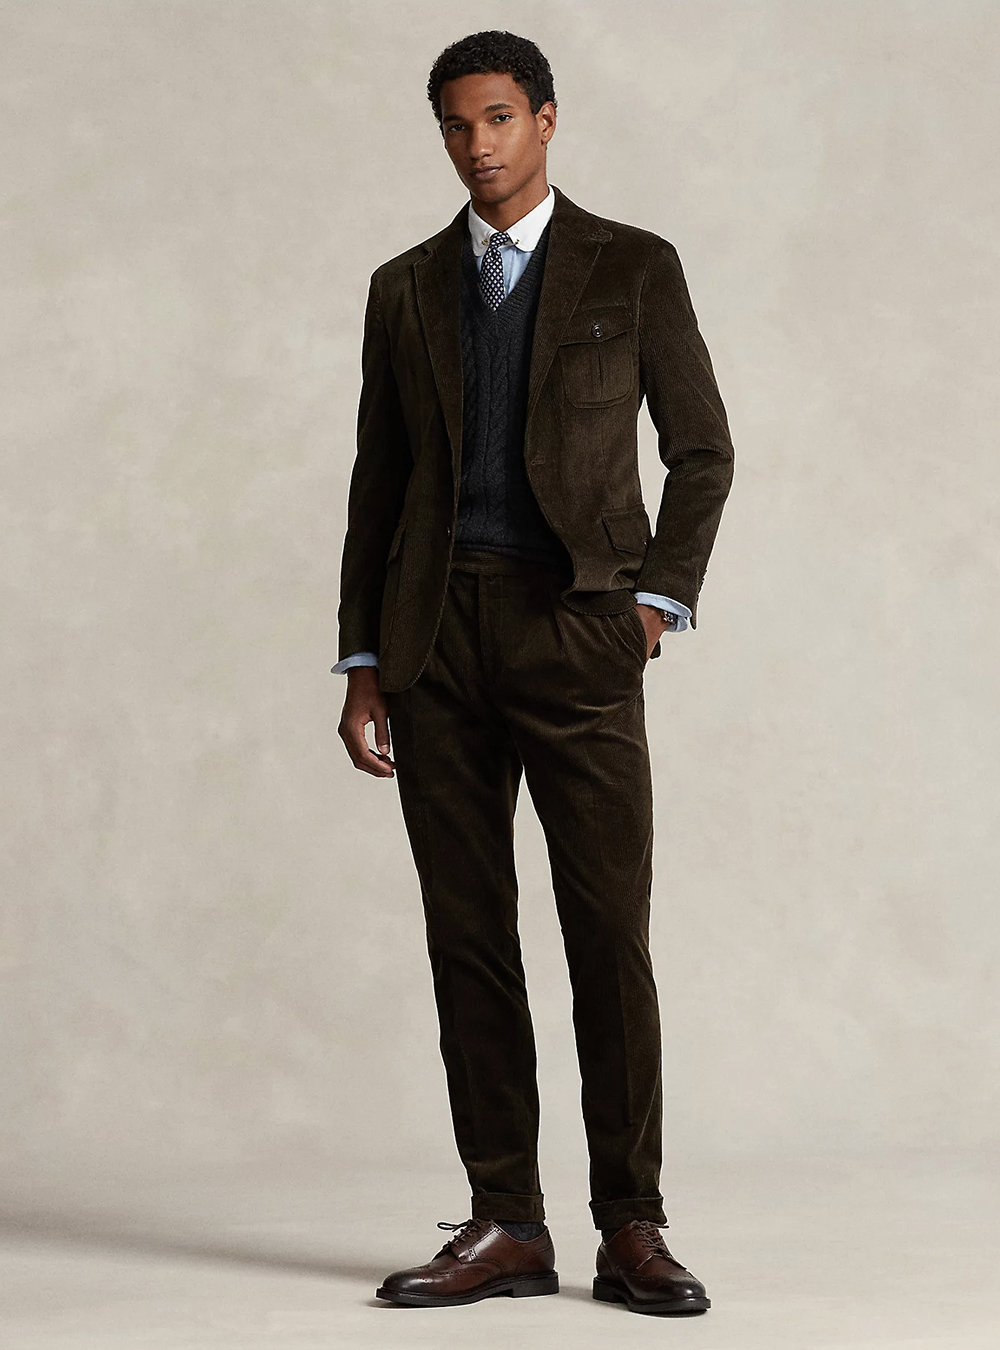 brown corduroy suit, navy sweater, white shirt, and brown derby shoes